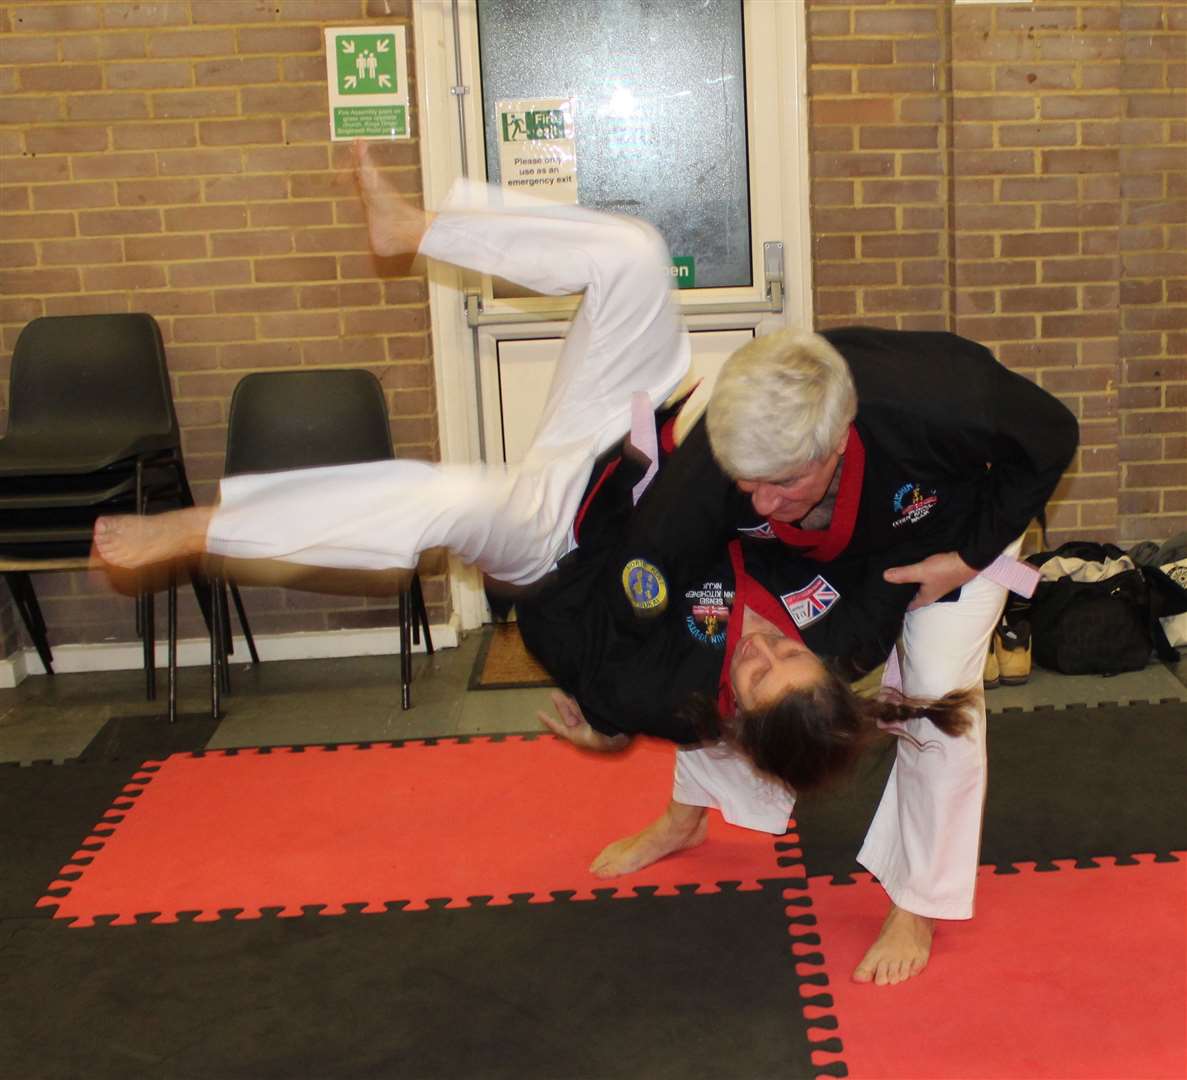 Terry and Ann Kitchener, from North Kent Ju-Jitsu Kai, demonstrate a throw. Picture: Trudi Kitchener (43114830)